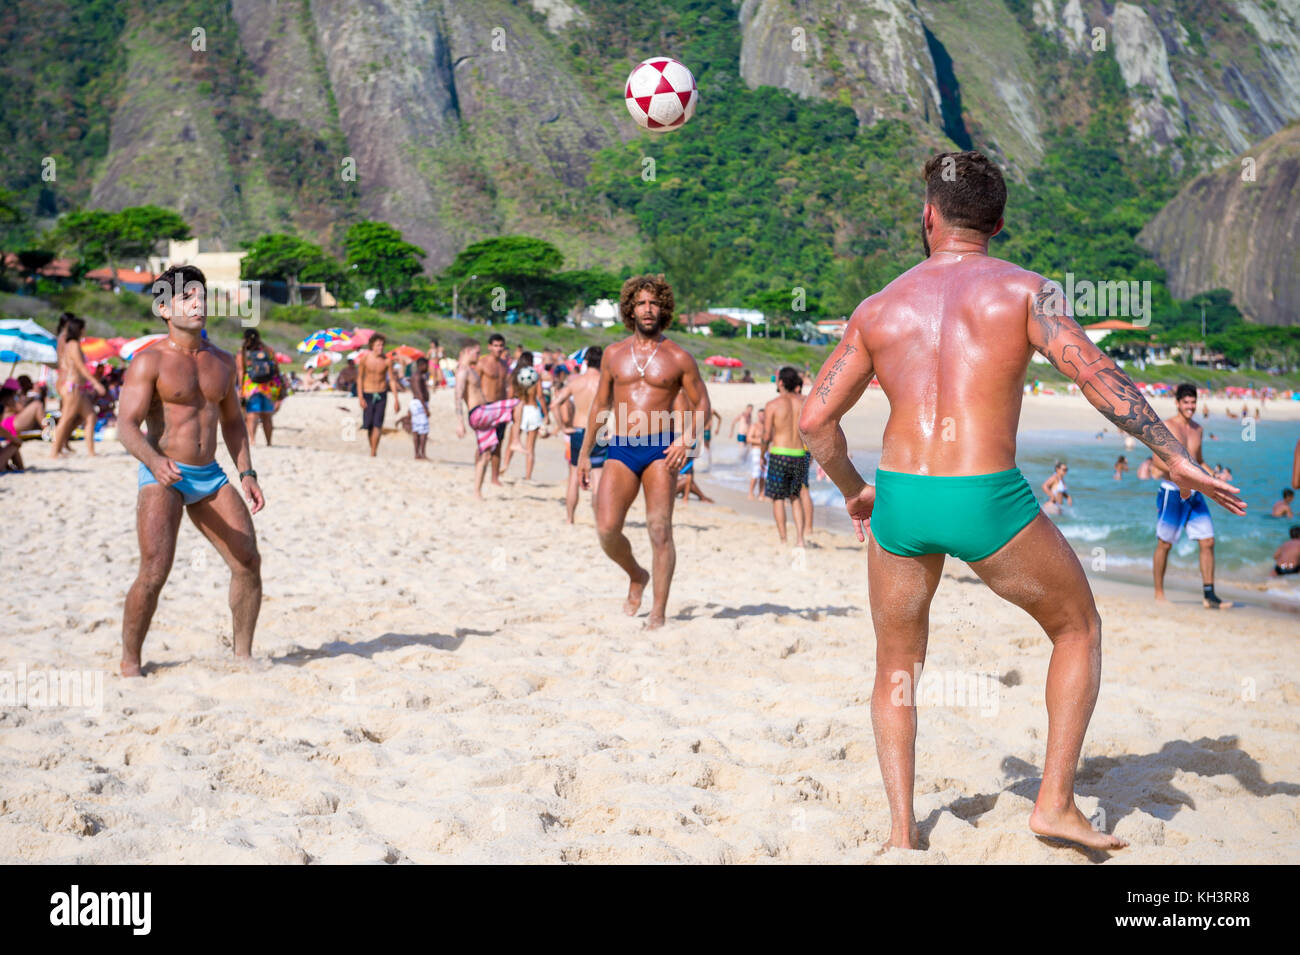 RIO DE JANEIRO - MARCH 4, 2017: Young Brazilians play a game of keepy-uppies (known locally as altinho) on the shore of Itacoatiara Beach. Stock Photo